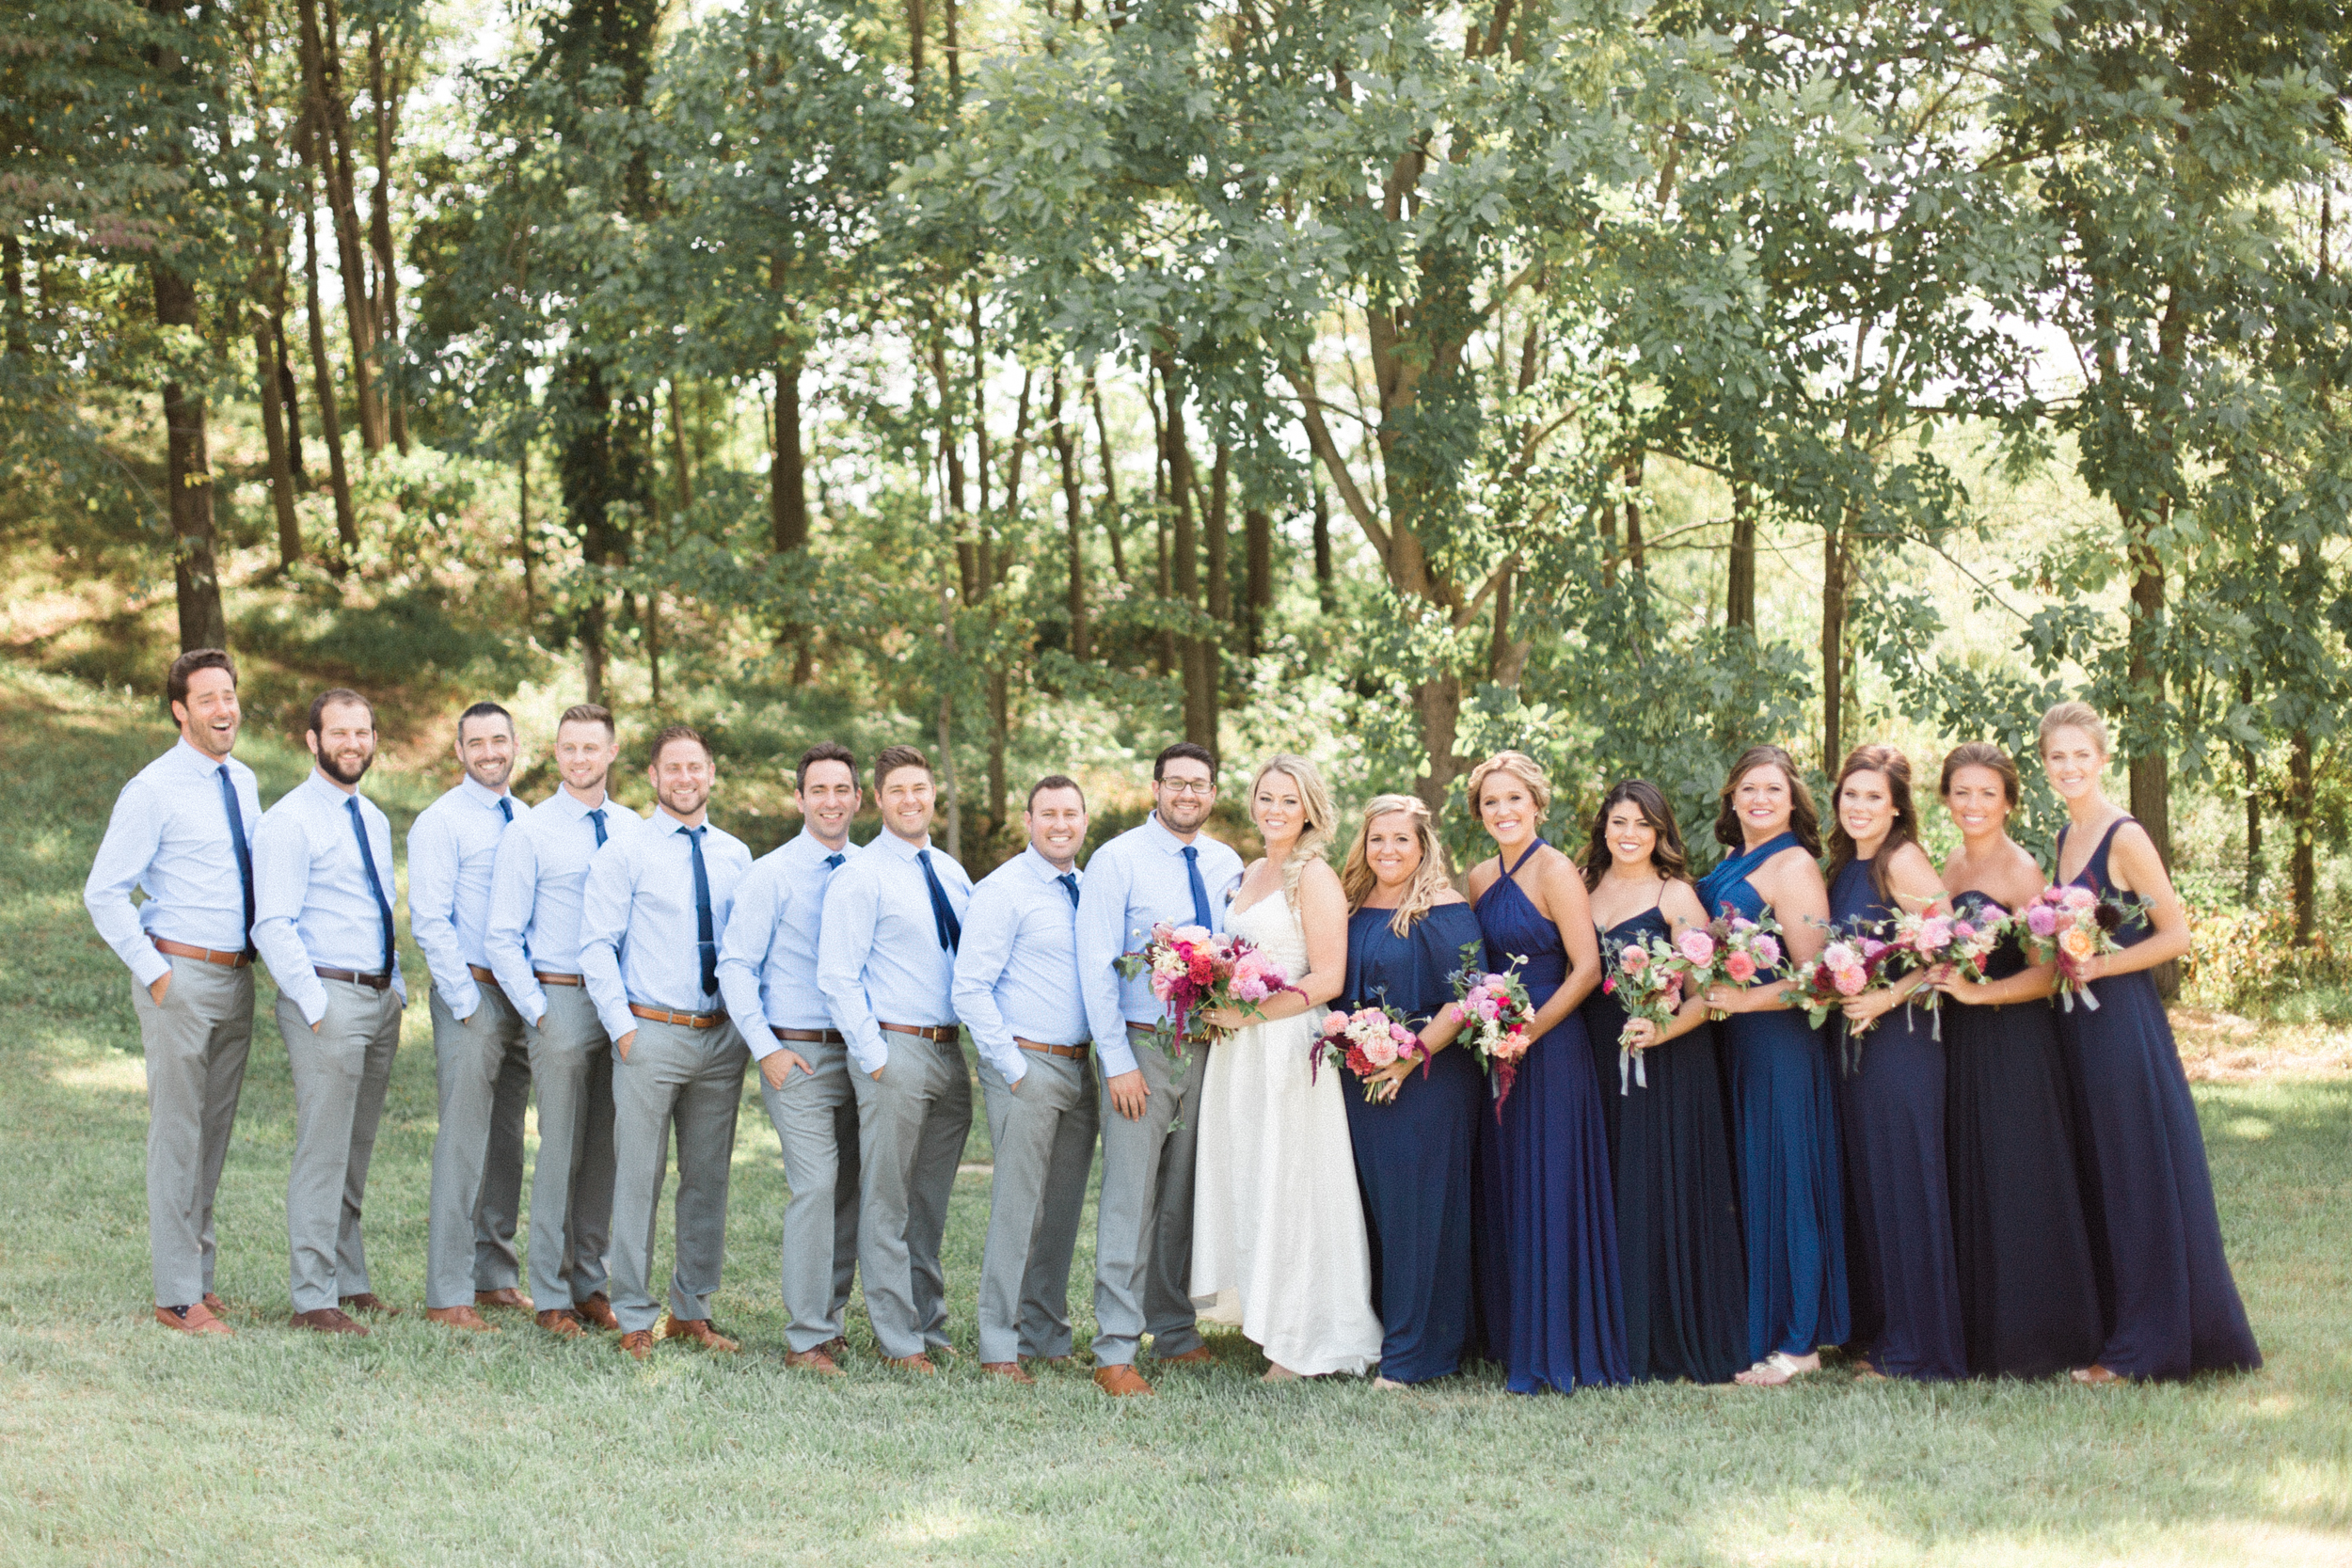 Bridal party photos, navy bridesmaids dresses. Photographed by Morgan Williams Photography.